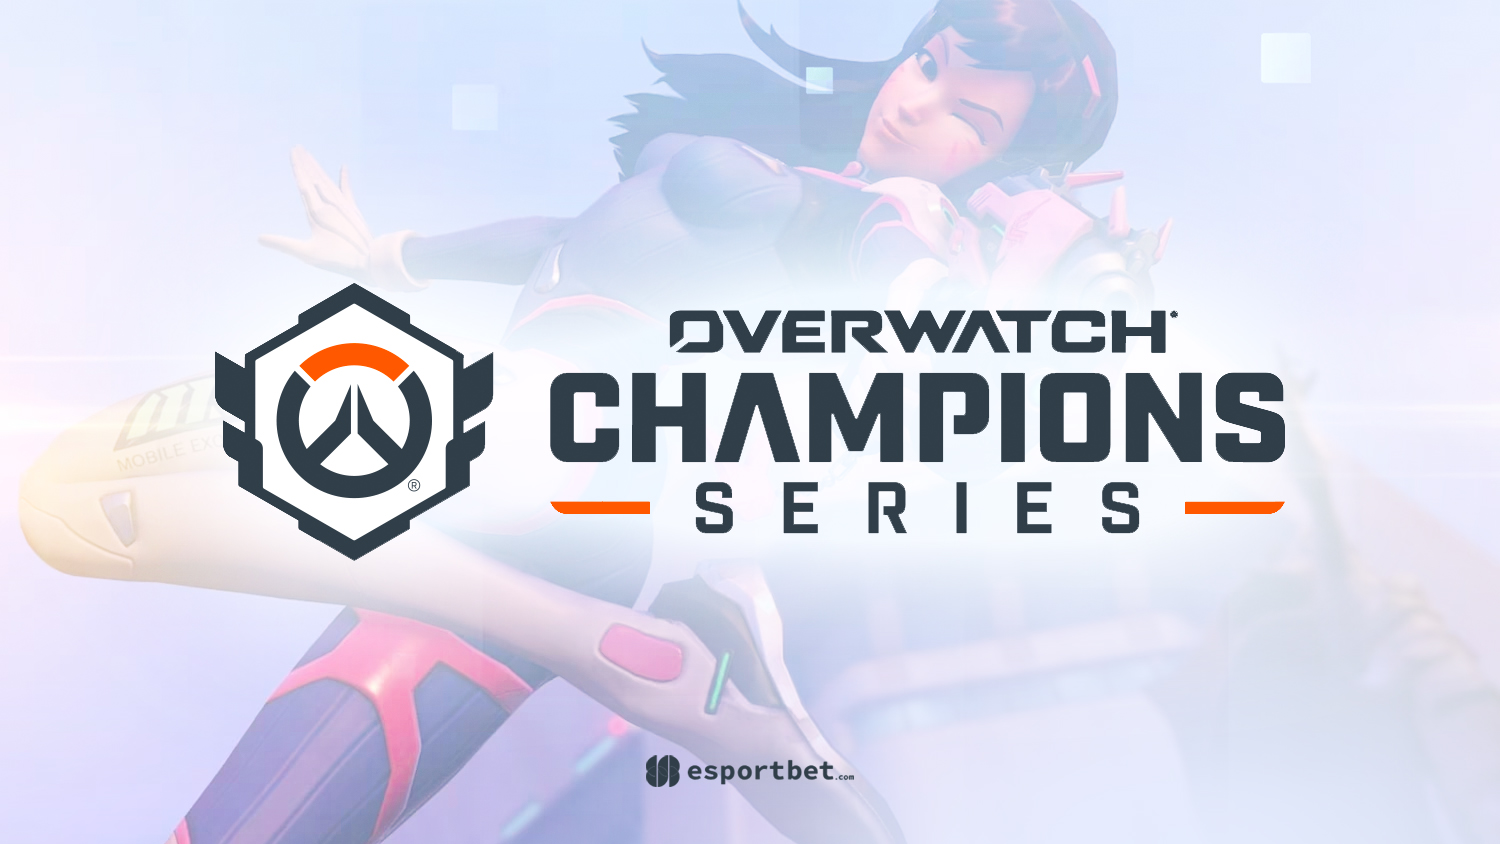 Overwatch eSports tournaments guide and schedule